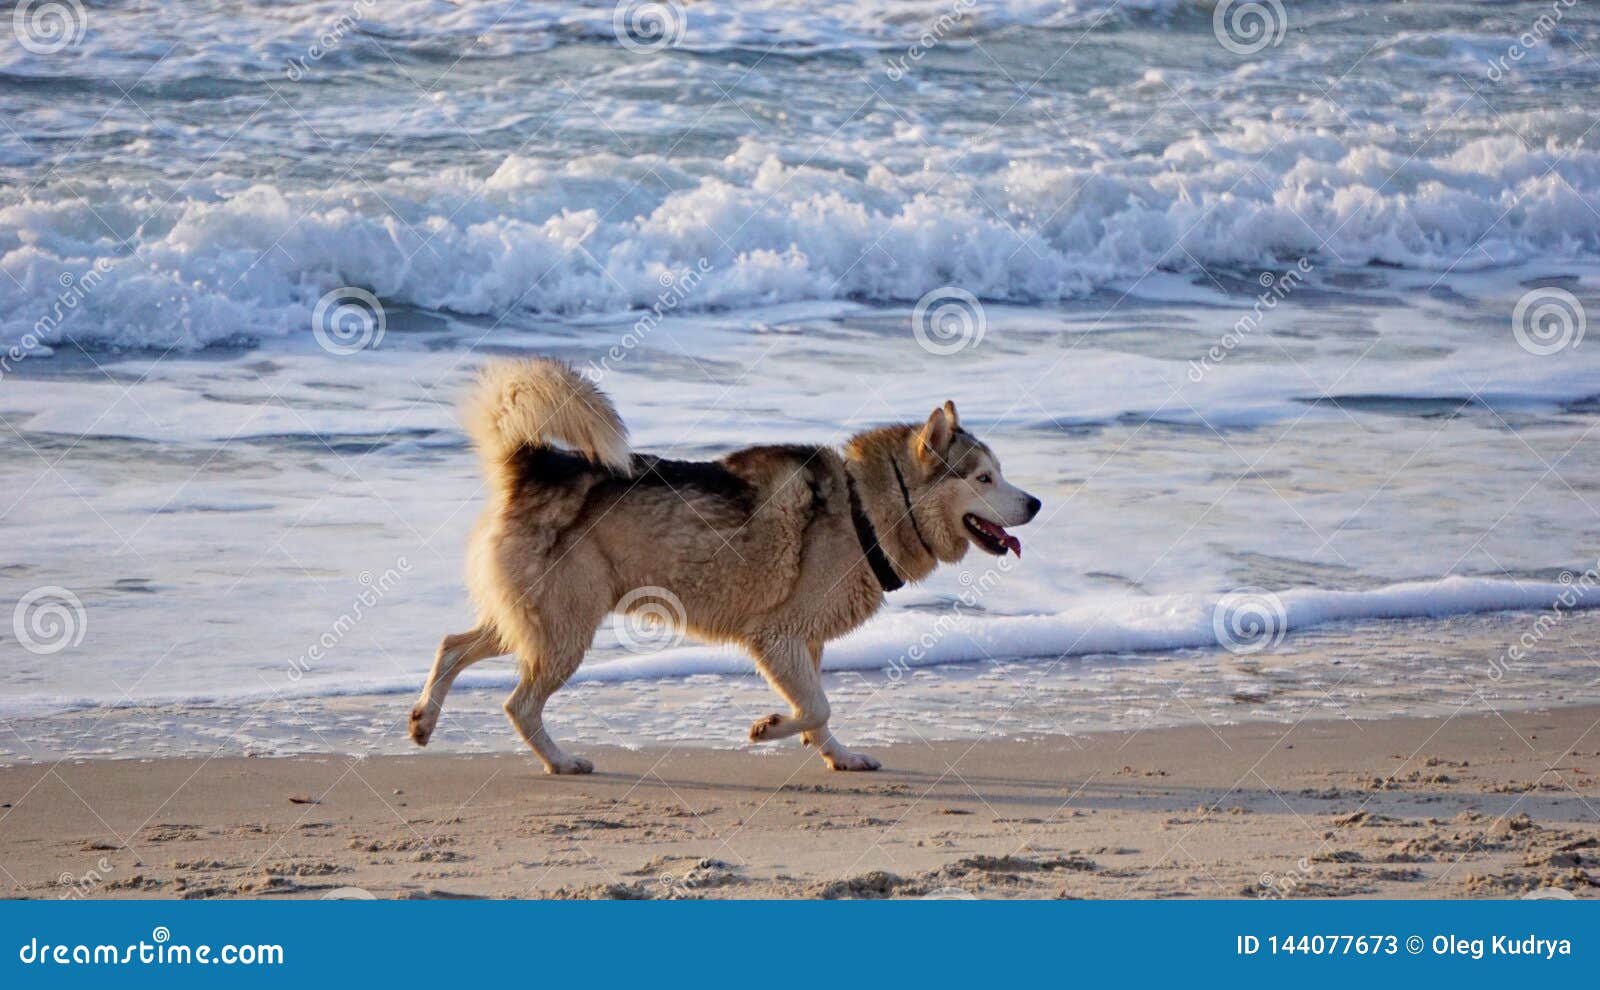 Dogs are Played on the Beach Stock Image - Image of narcissus, meet